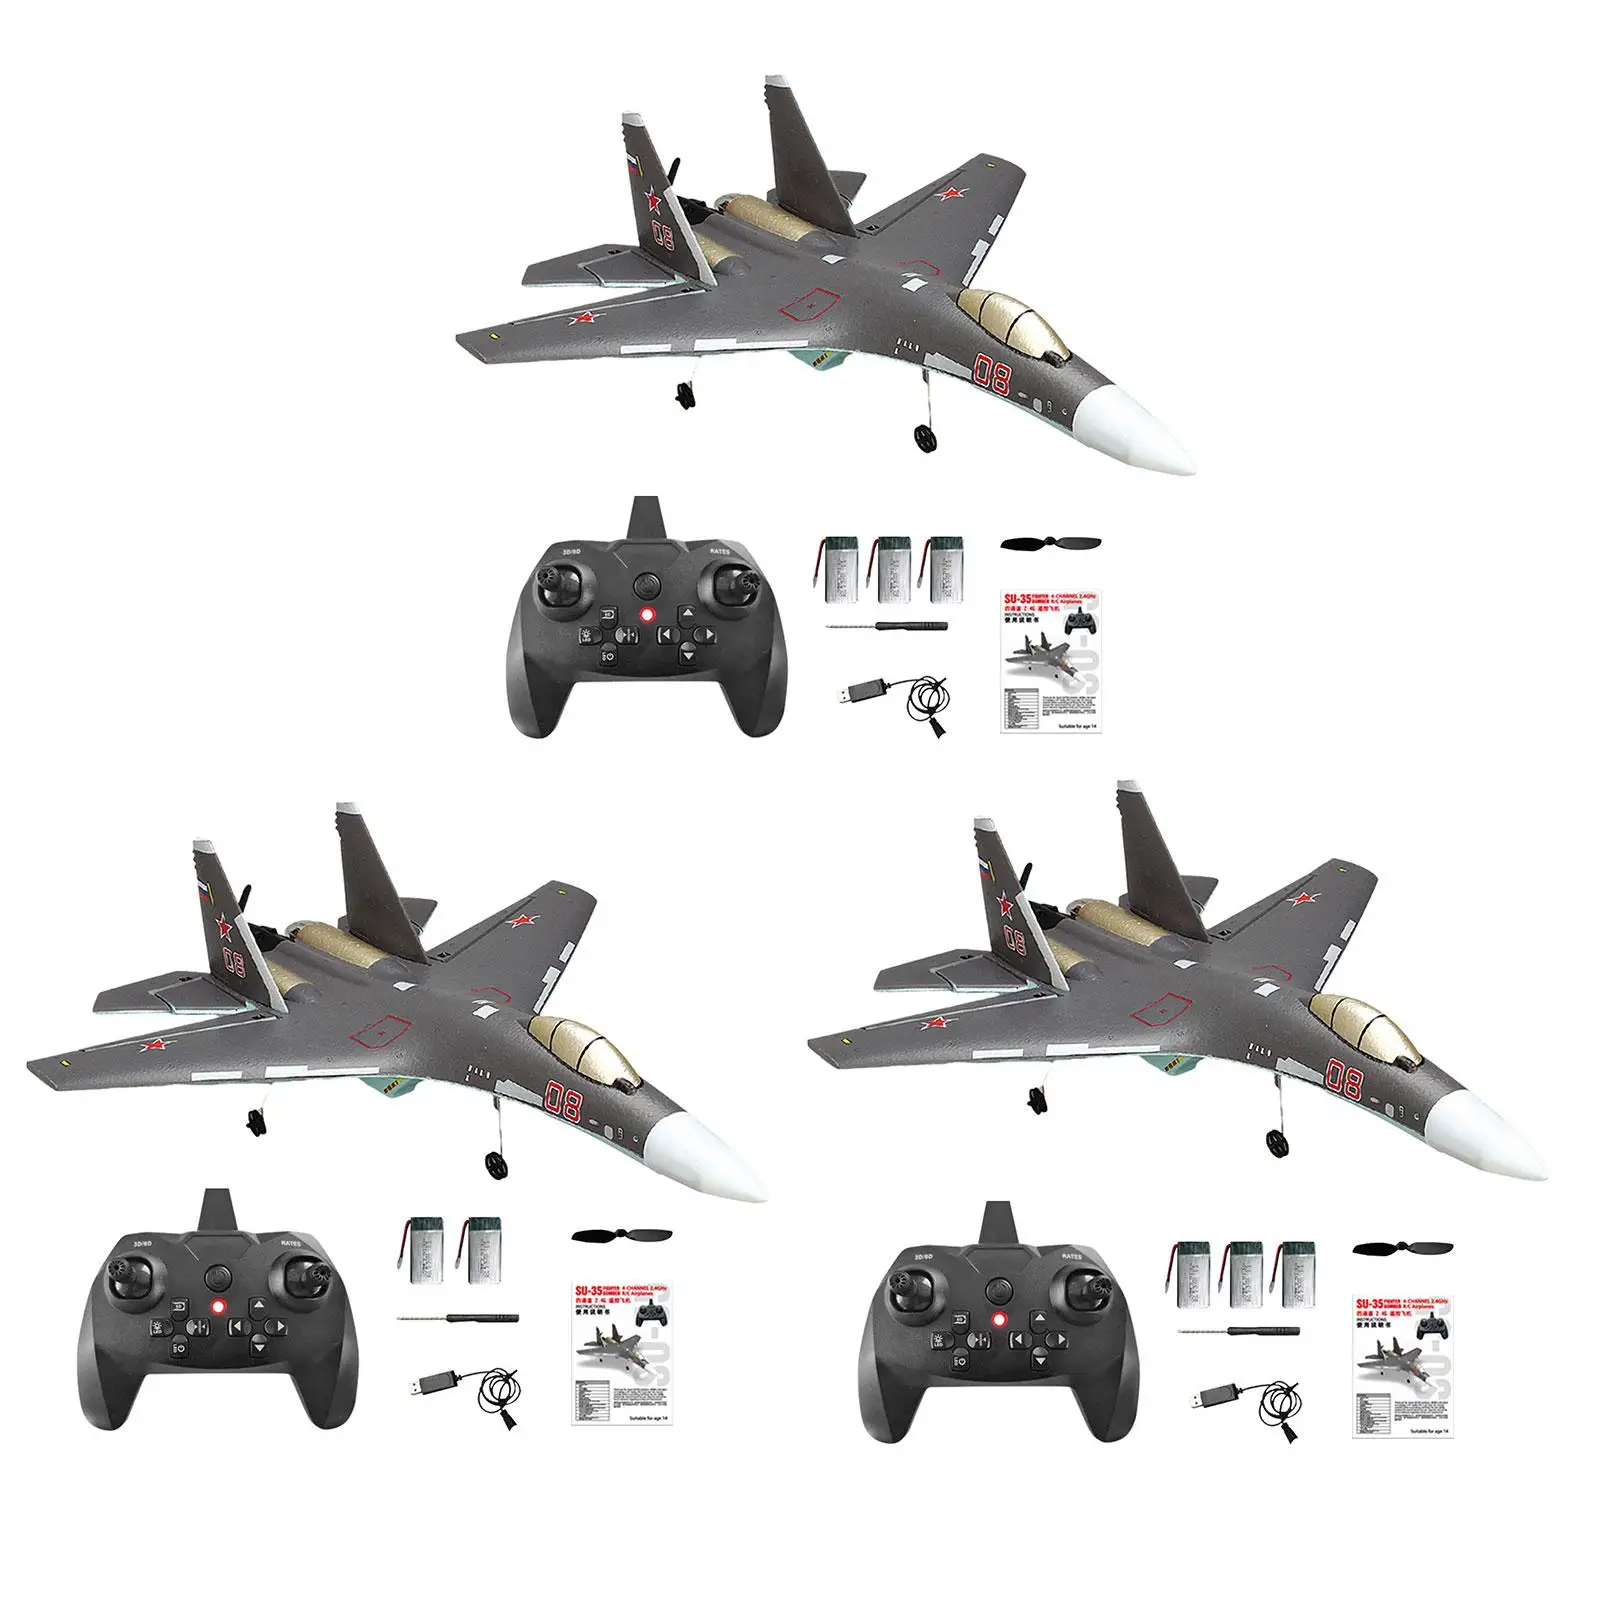 6 Axis Fighter 4 Ch Distance 300Meter Altitude Hold Remote Control Jet Airplane for Boys Kids Teens Beginner Adults